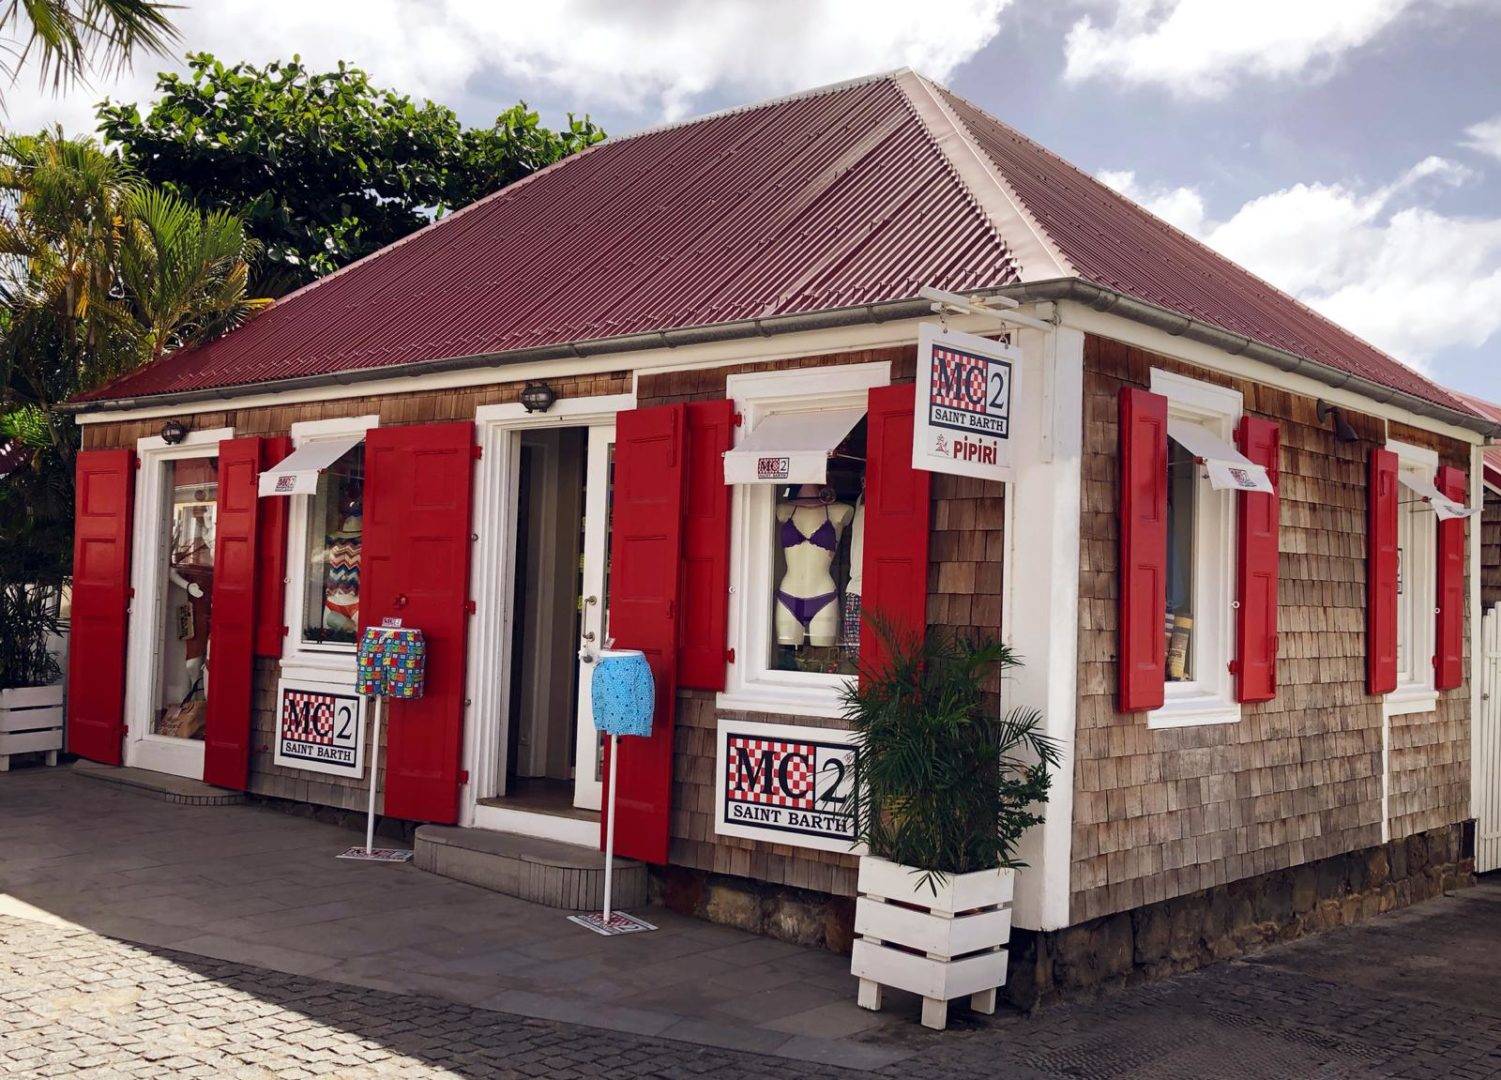 Shops in St Barth's